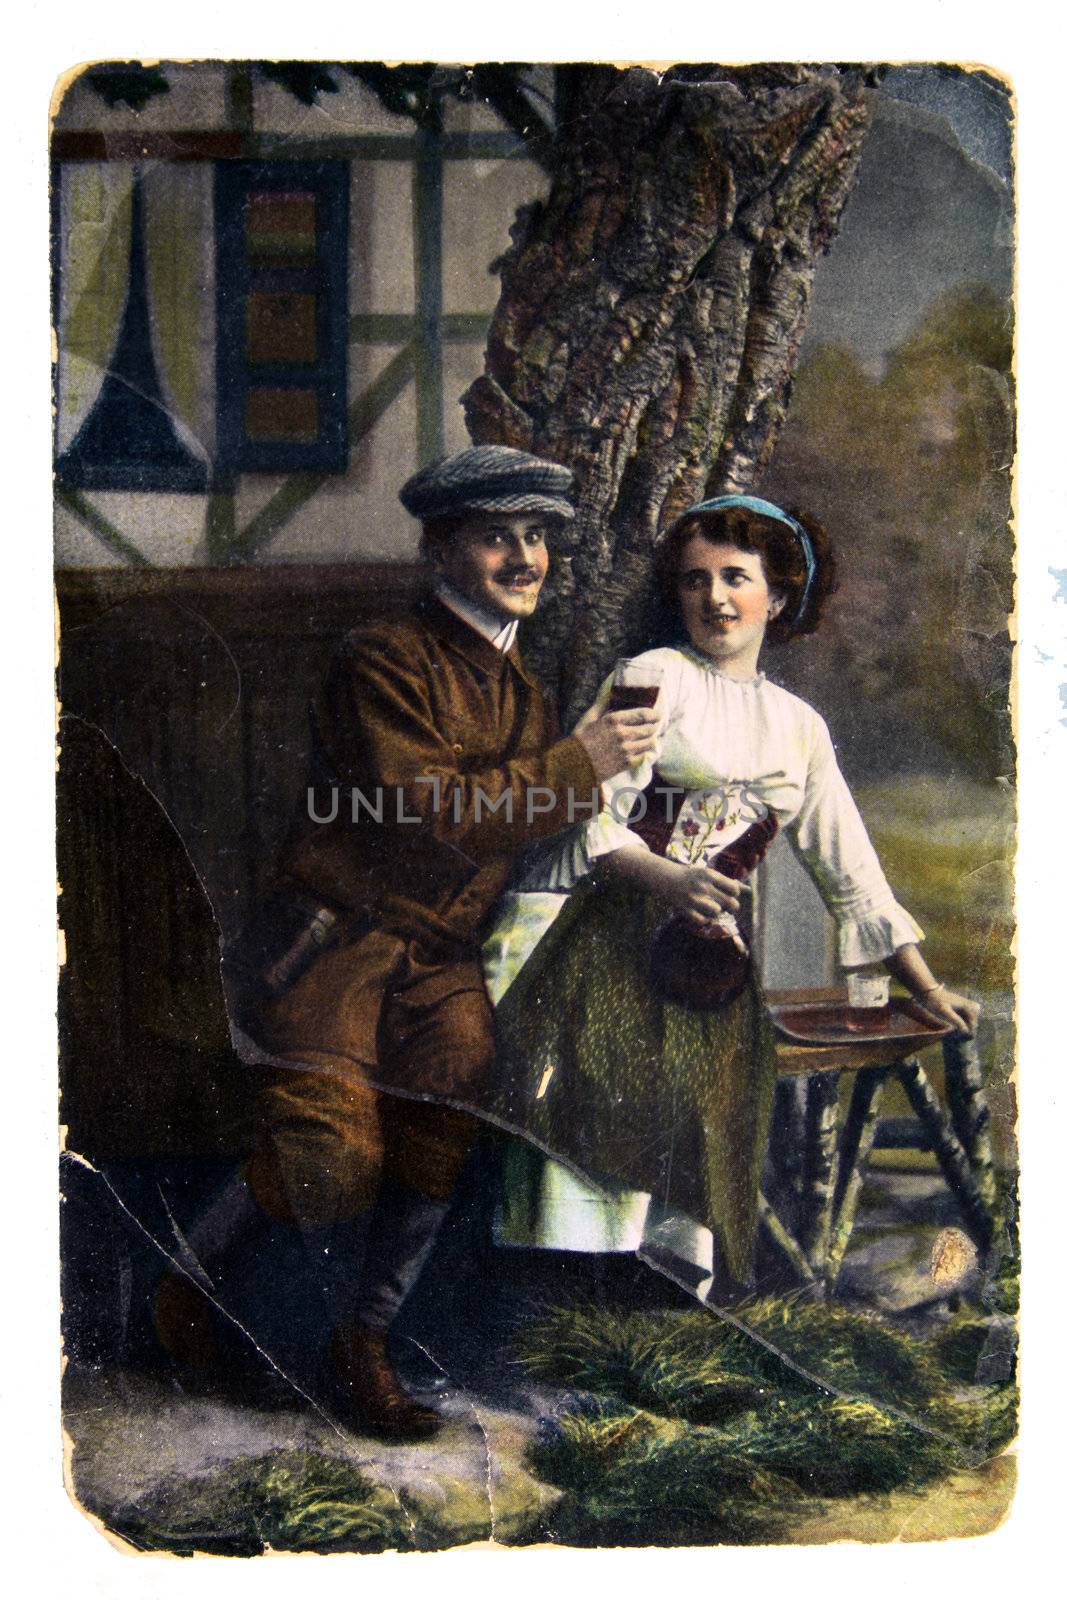 RUSSIA - CIRCA 1911: Postcard printed in Russia shows man with a glass of wine standing next to a woman holding a jug - Russia 1911